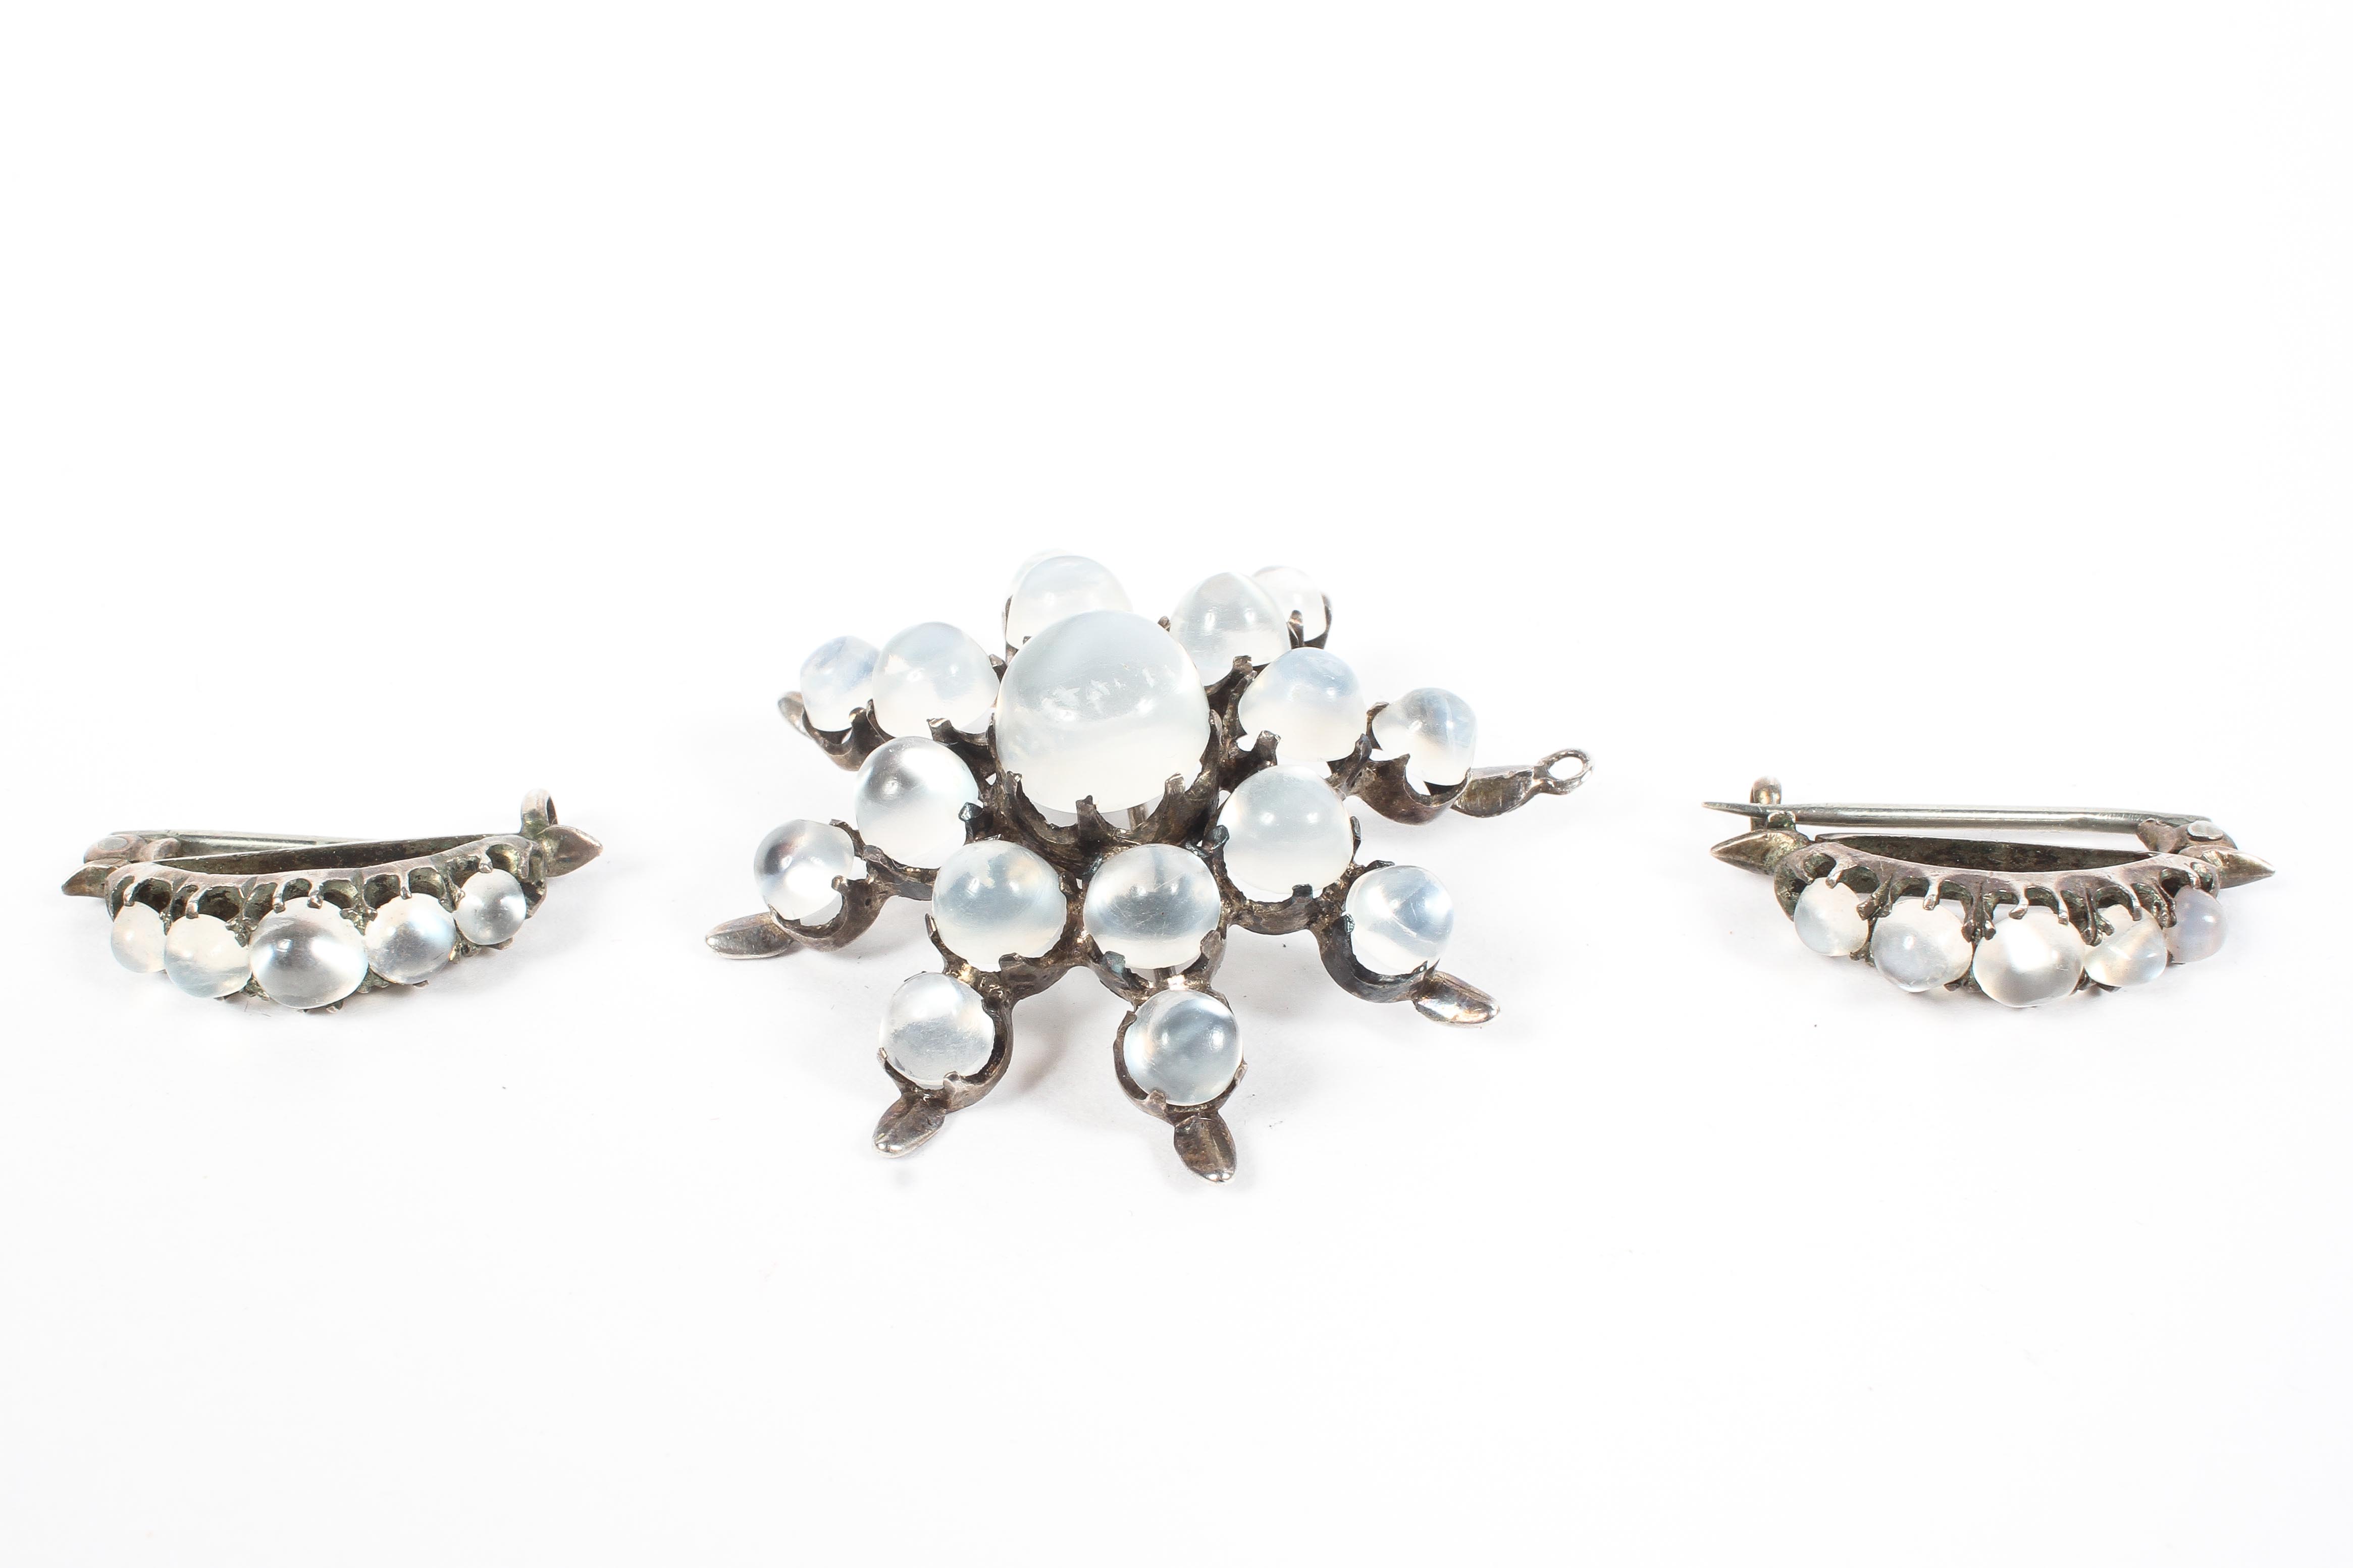 A Victorian moonstone set star brooch together with matching moonstone lapel clips.